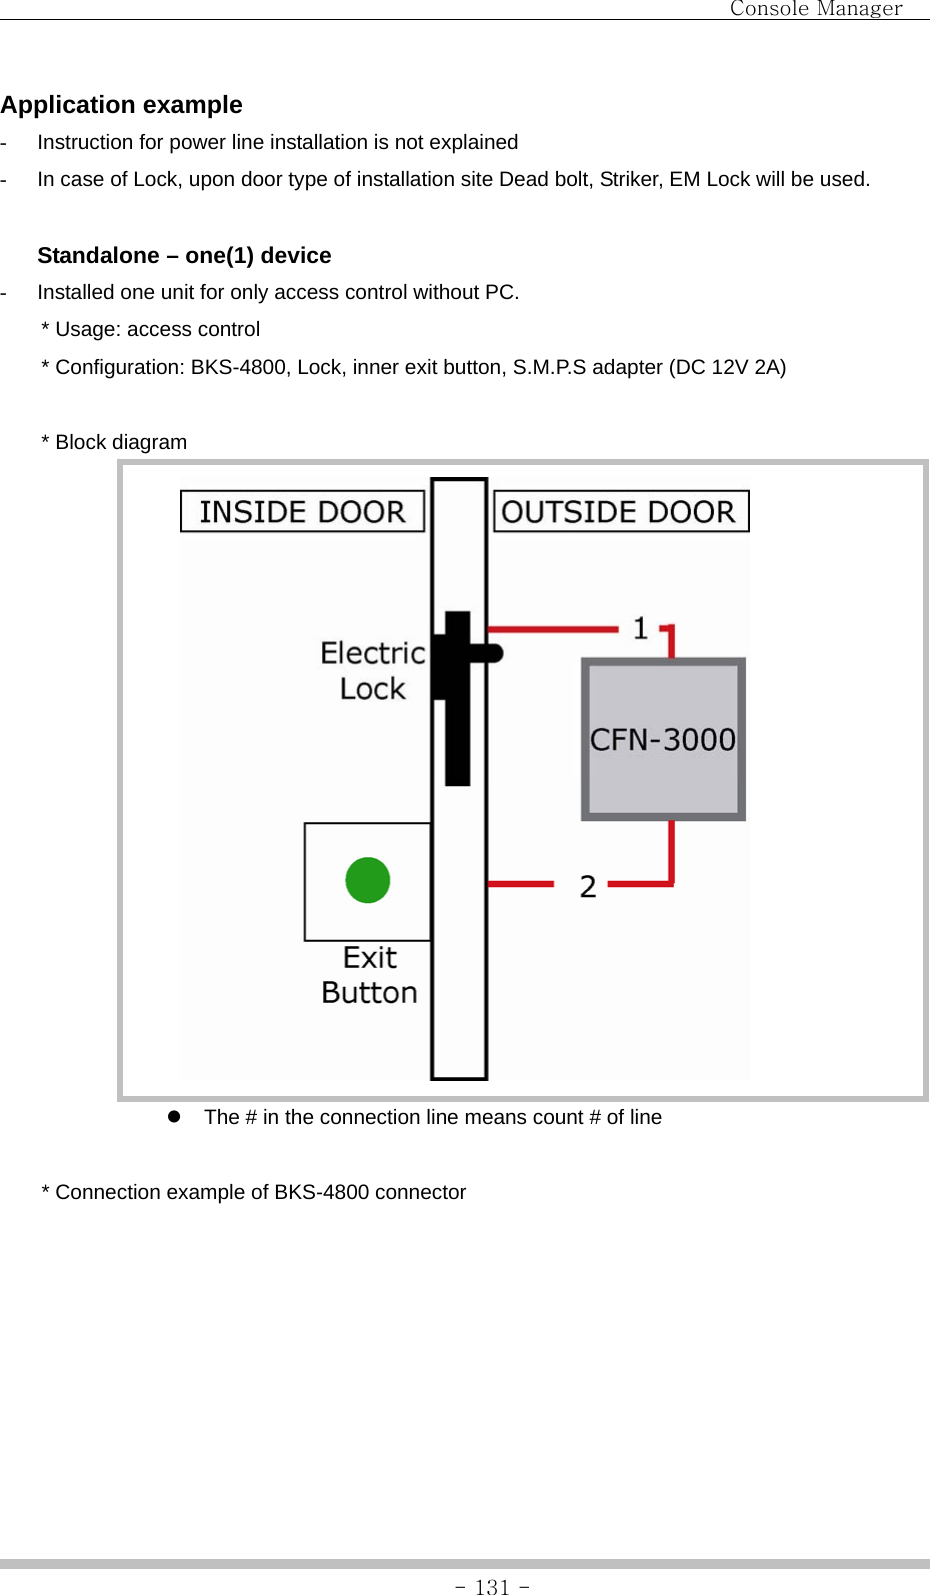                                Console Manager               - 131 -Application example -  Instruction for power line installation is not explained -  In case of Lock, upon door type of installation site Dead bolt, Striker, EM Lock will be used.    Standalone – one(1) device -  Installed one unit for only access control without PC. * Usage: access control   * Configuration: BKS-4800, Lock, inner exit button, S.M.P.S adapter (DC 12V 2A)  * Block diagram  z  The # in the connection line means count # of line  * Connection example of BKS-4800 connector   